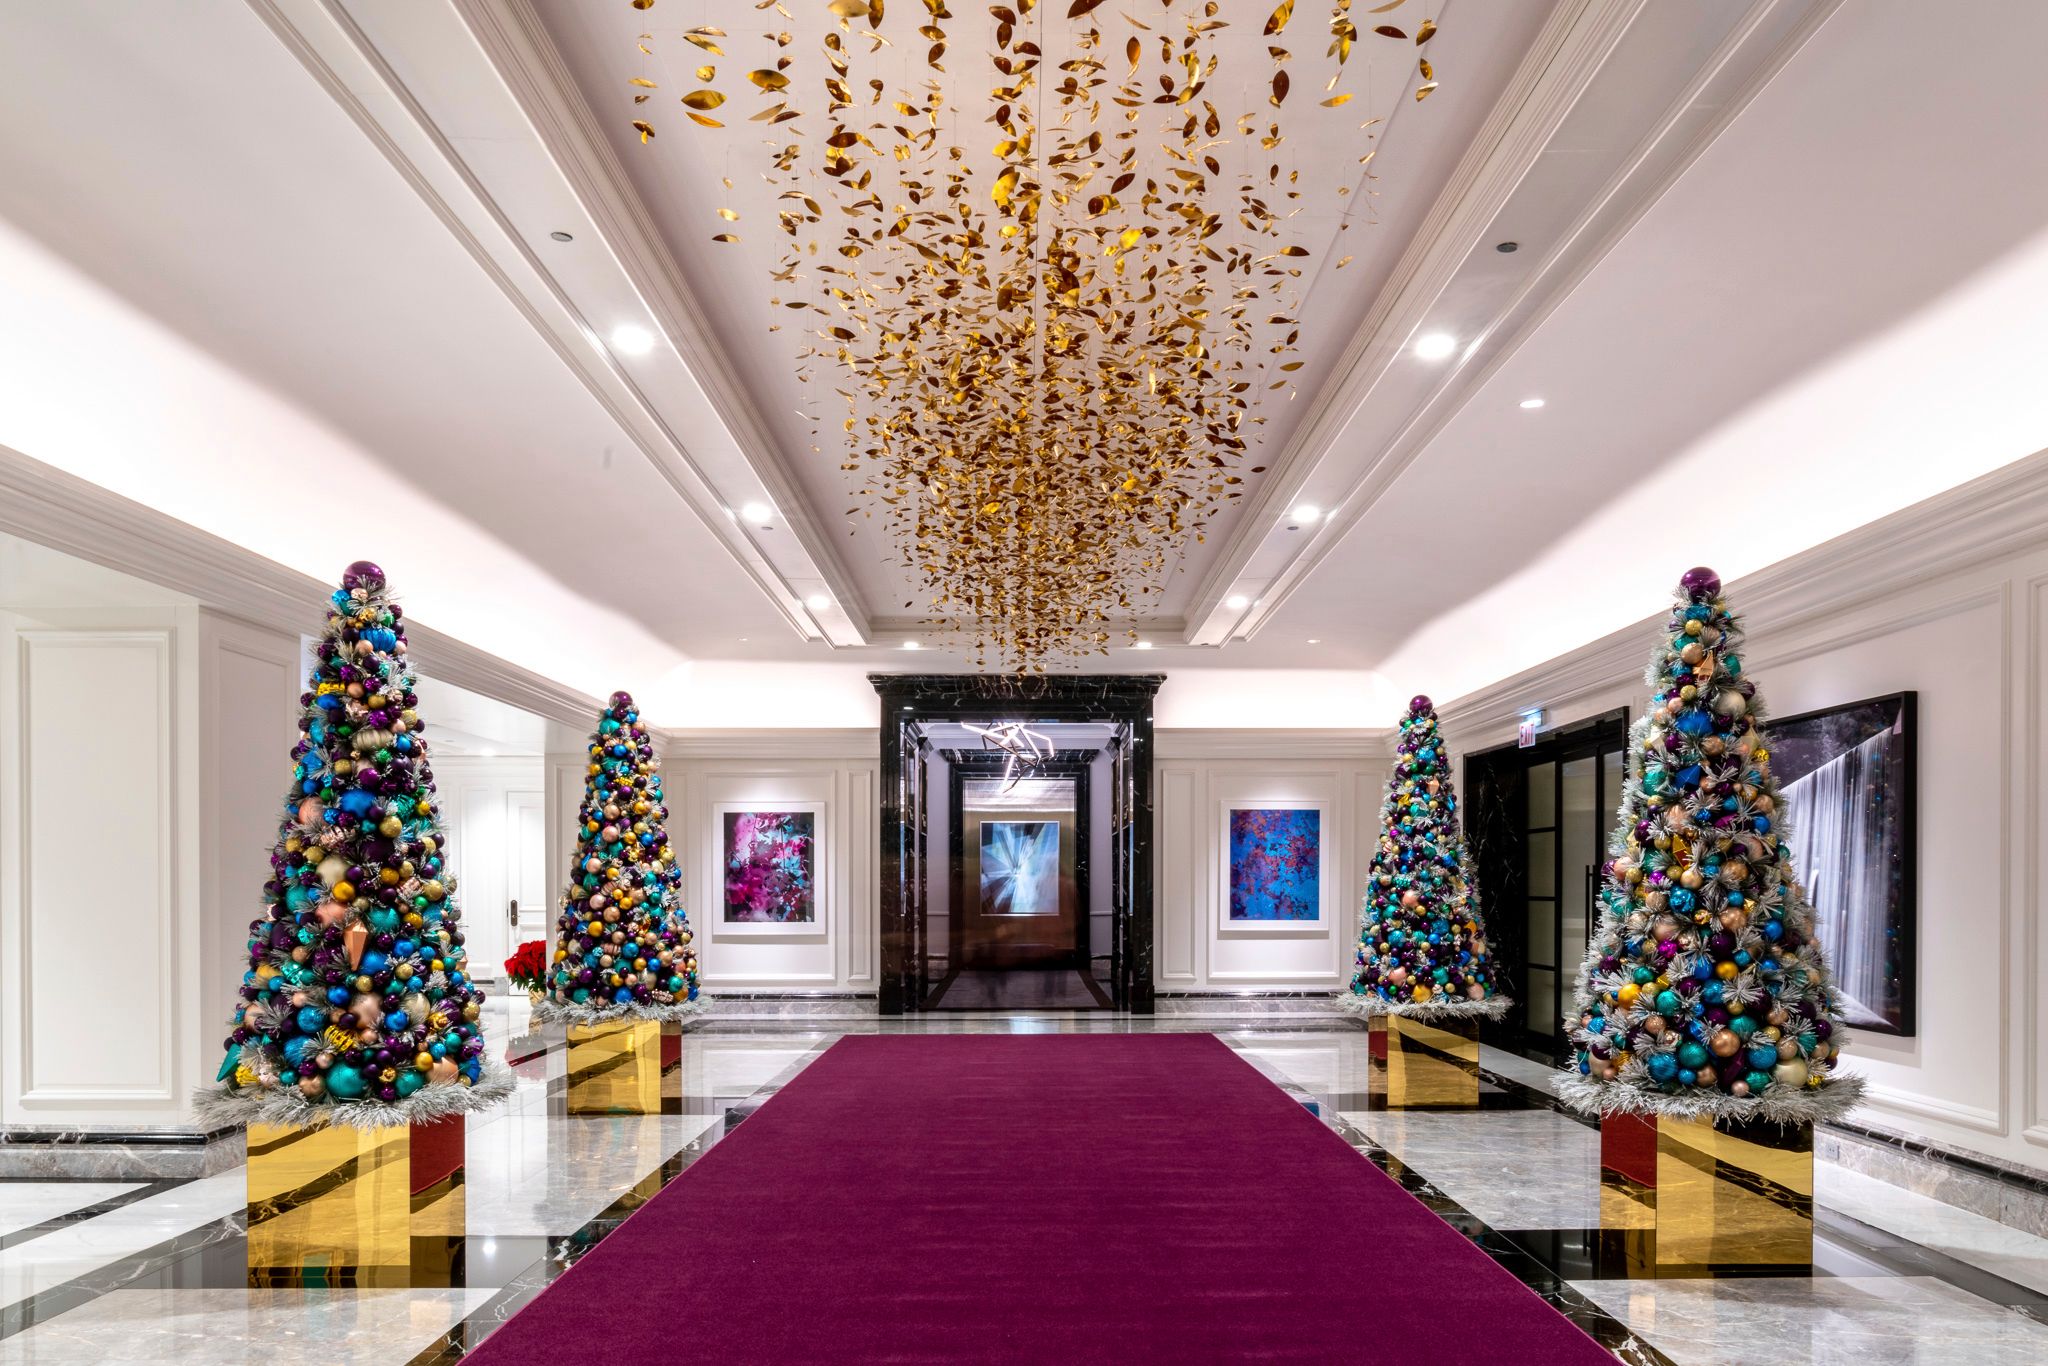 Four seasons hotel Chicago at christmas